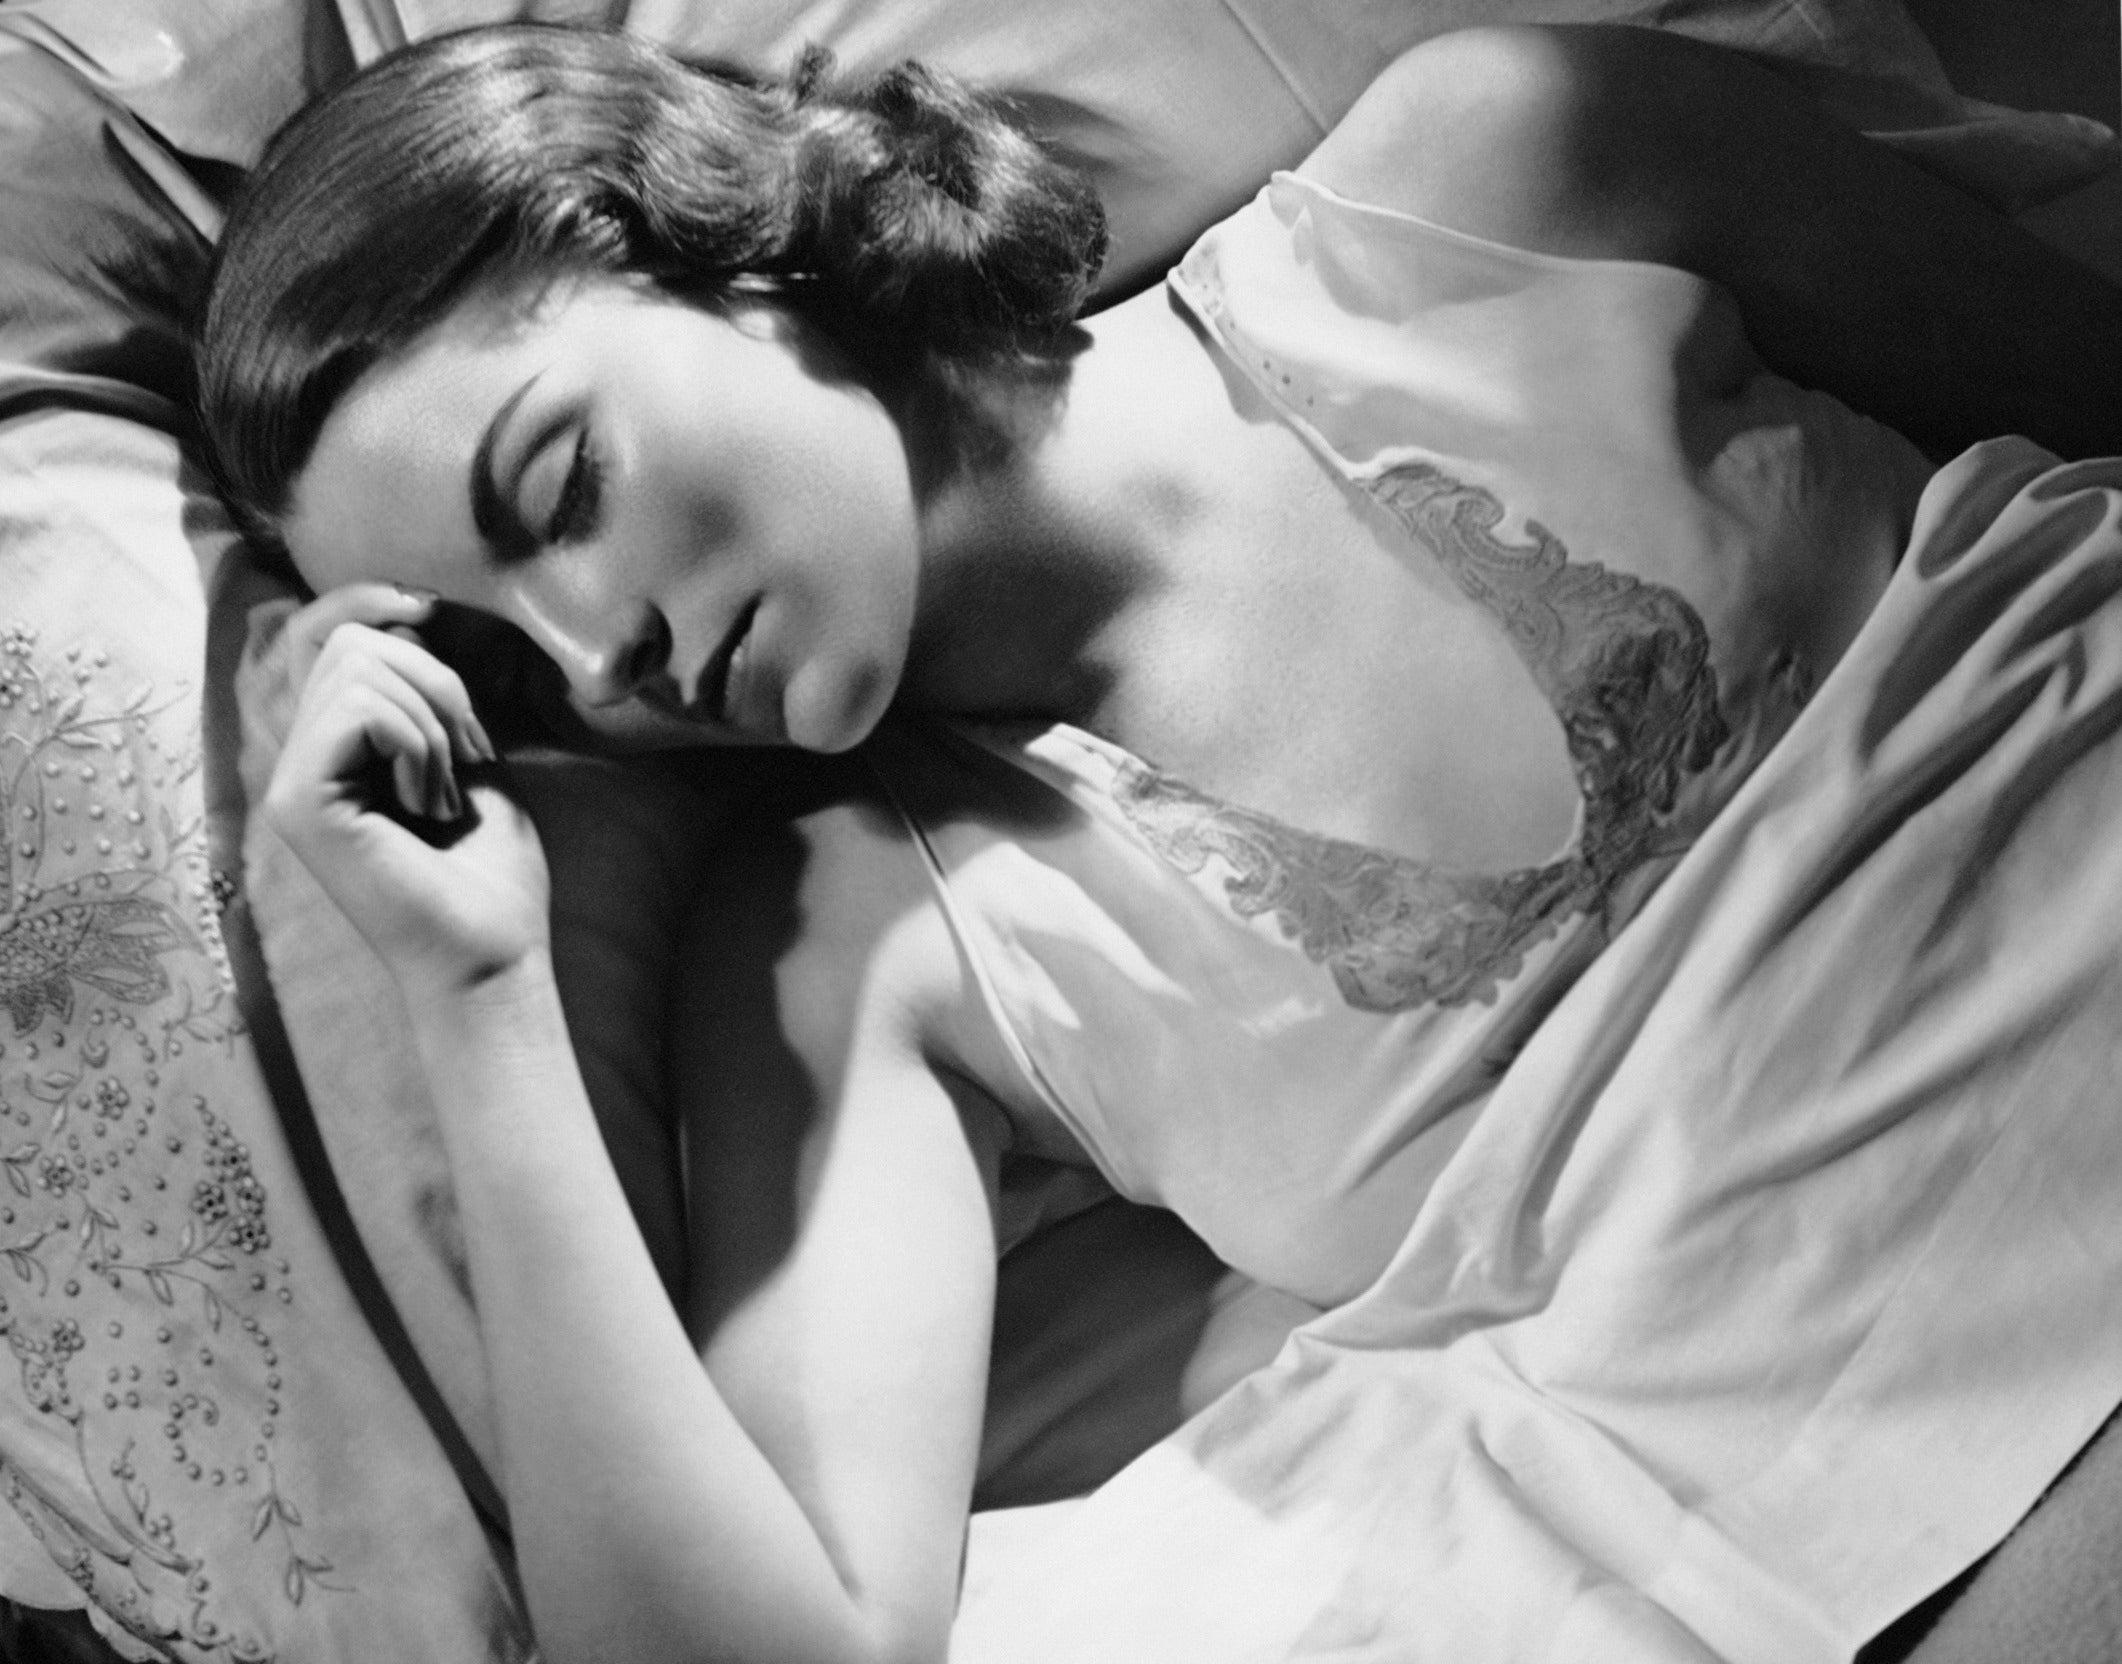 The link between disrupted sleep and an increased risk of death was clearer in women than men